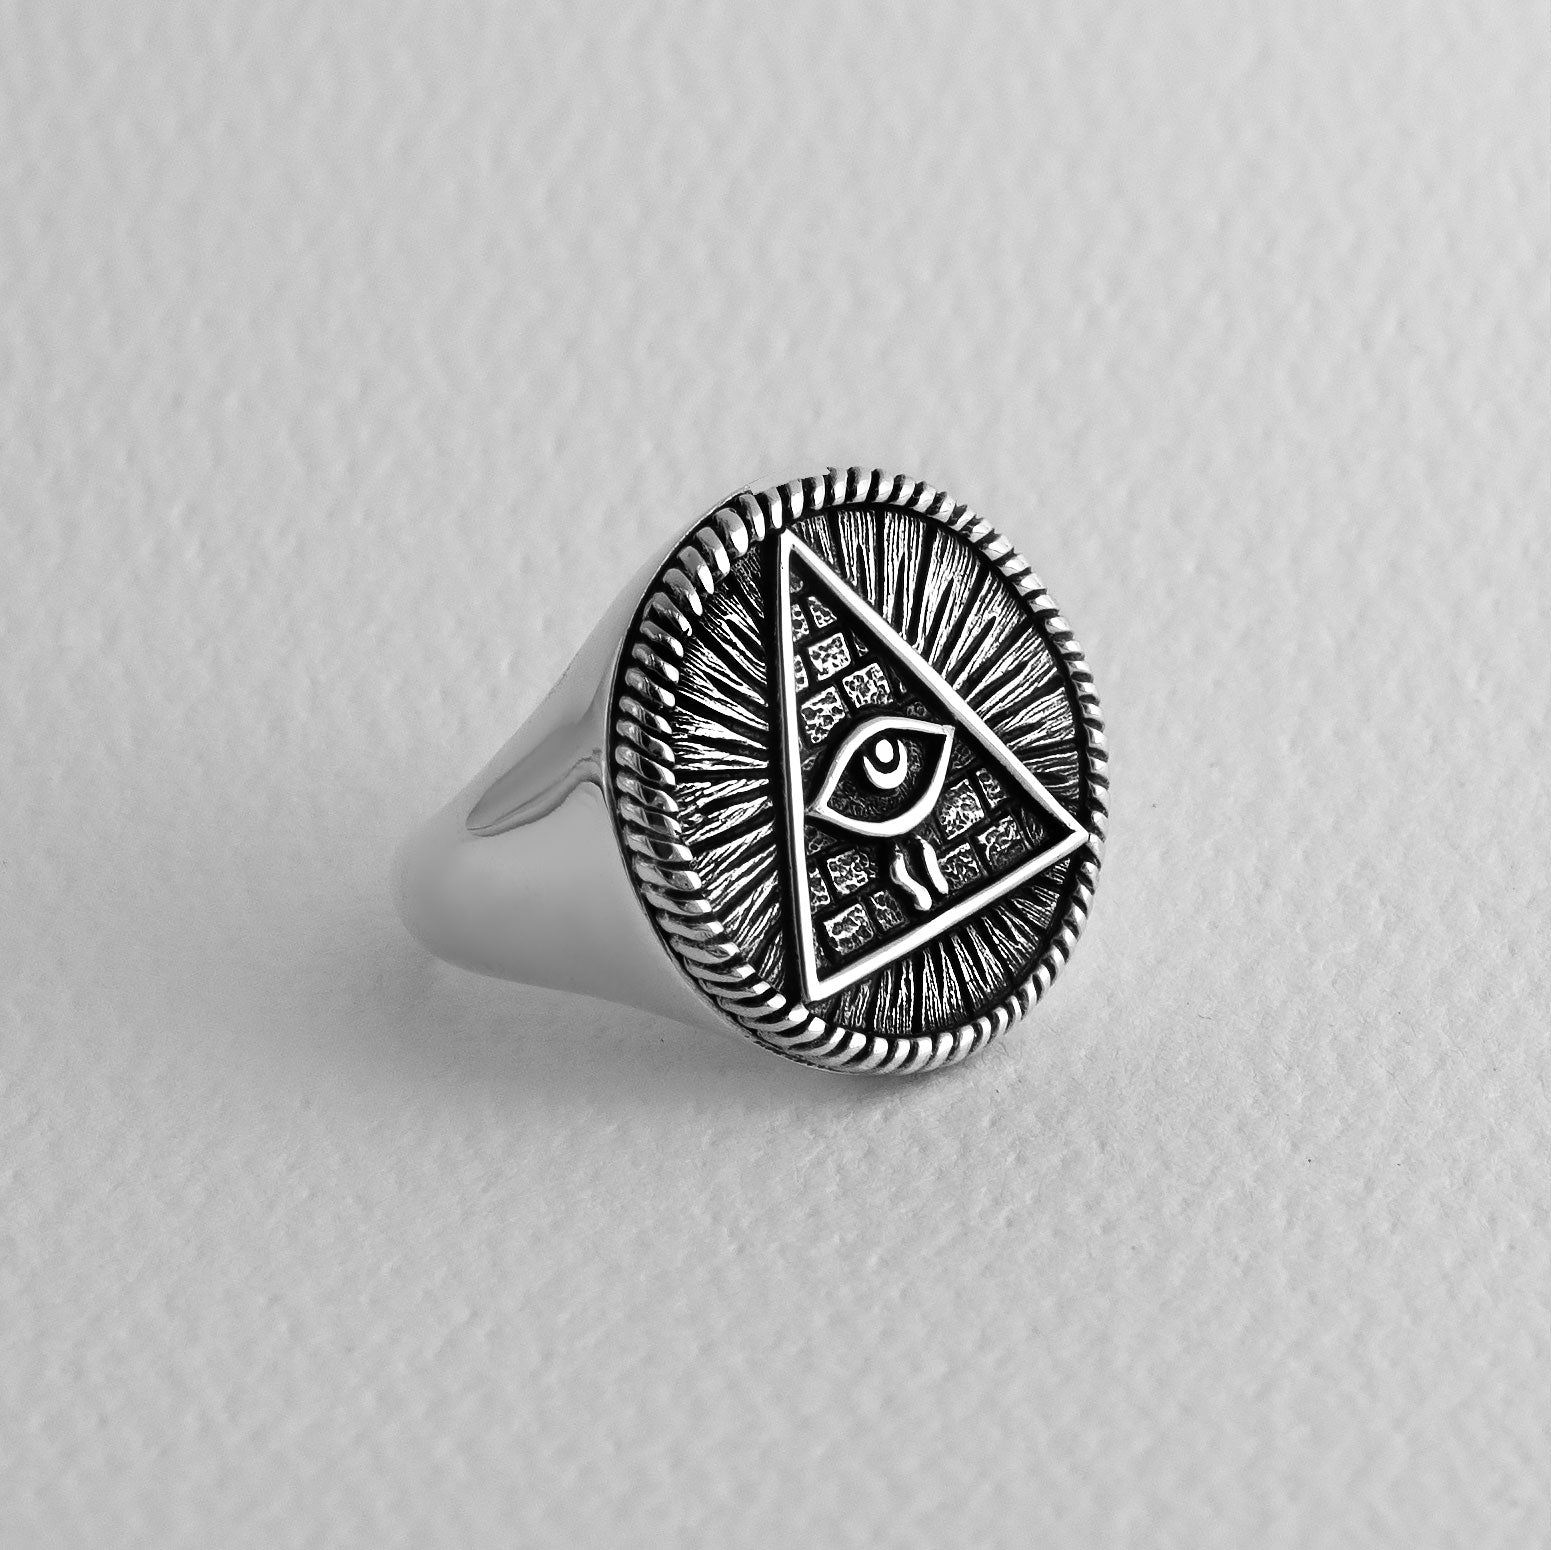 All-Seeing Eye Pyramid Sterling Silver Ring